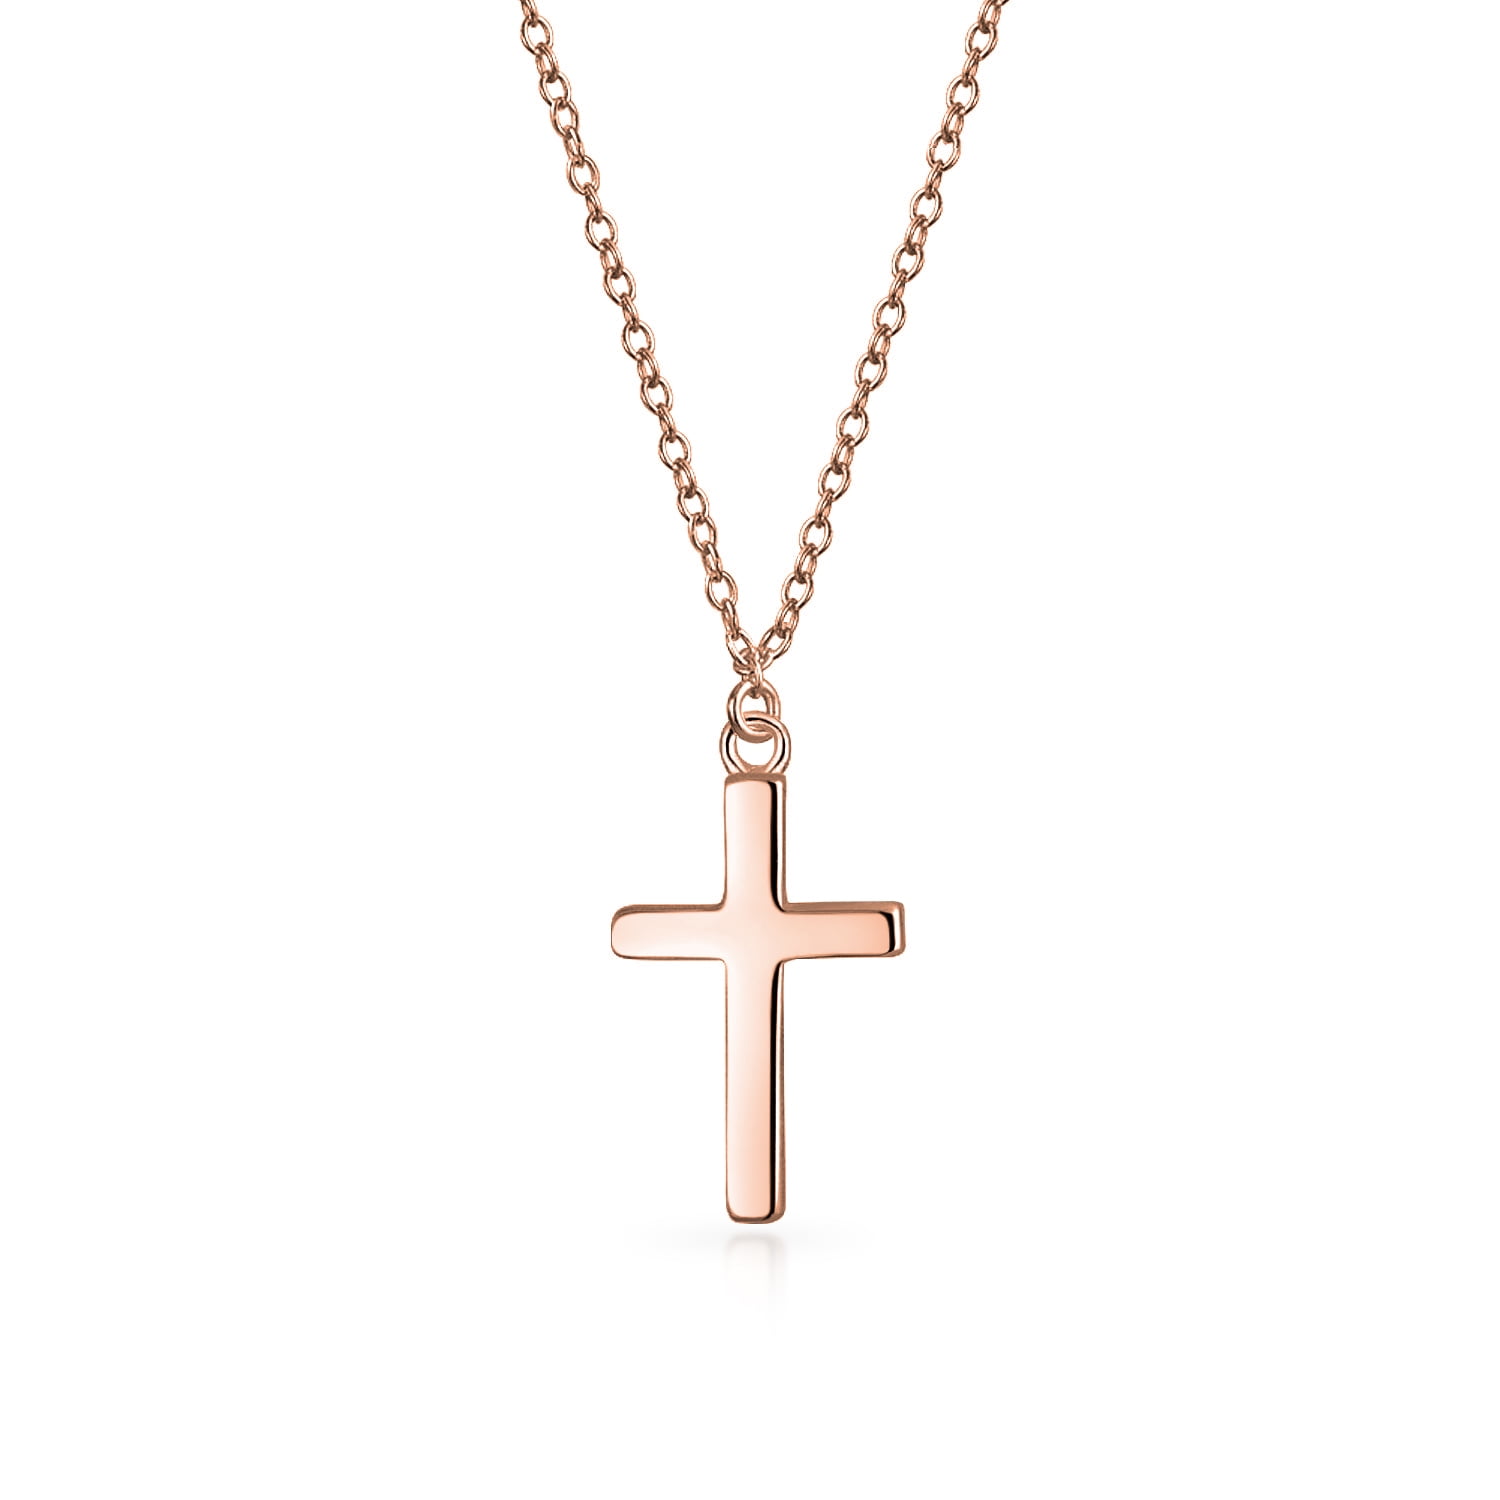 in Solid Sterling SIlver Modern Simple Cross Charm Pendant Necklace Small 